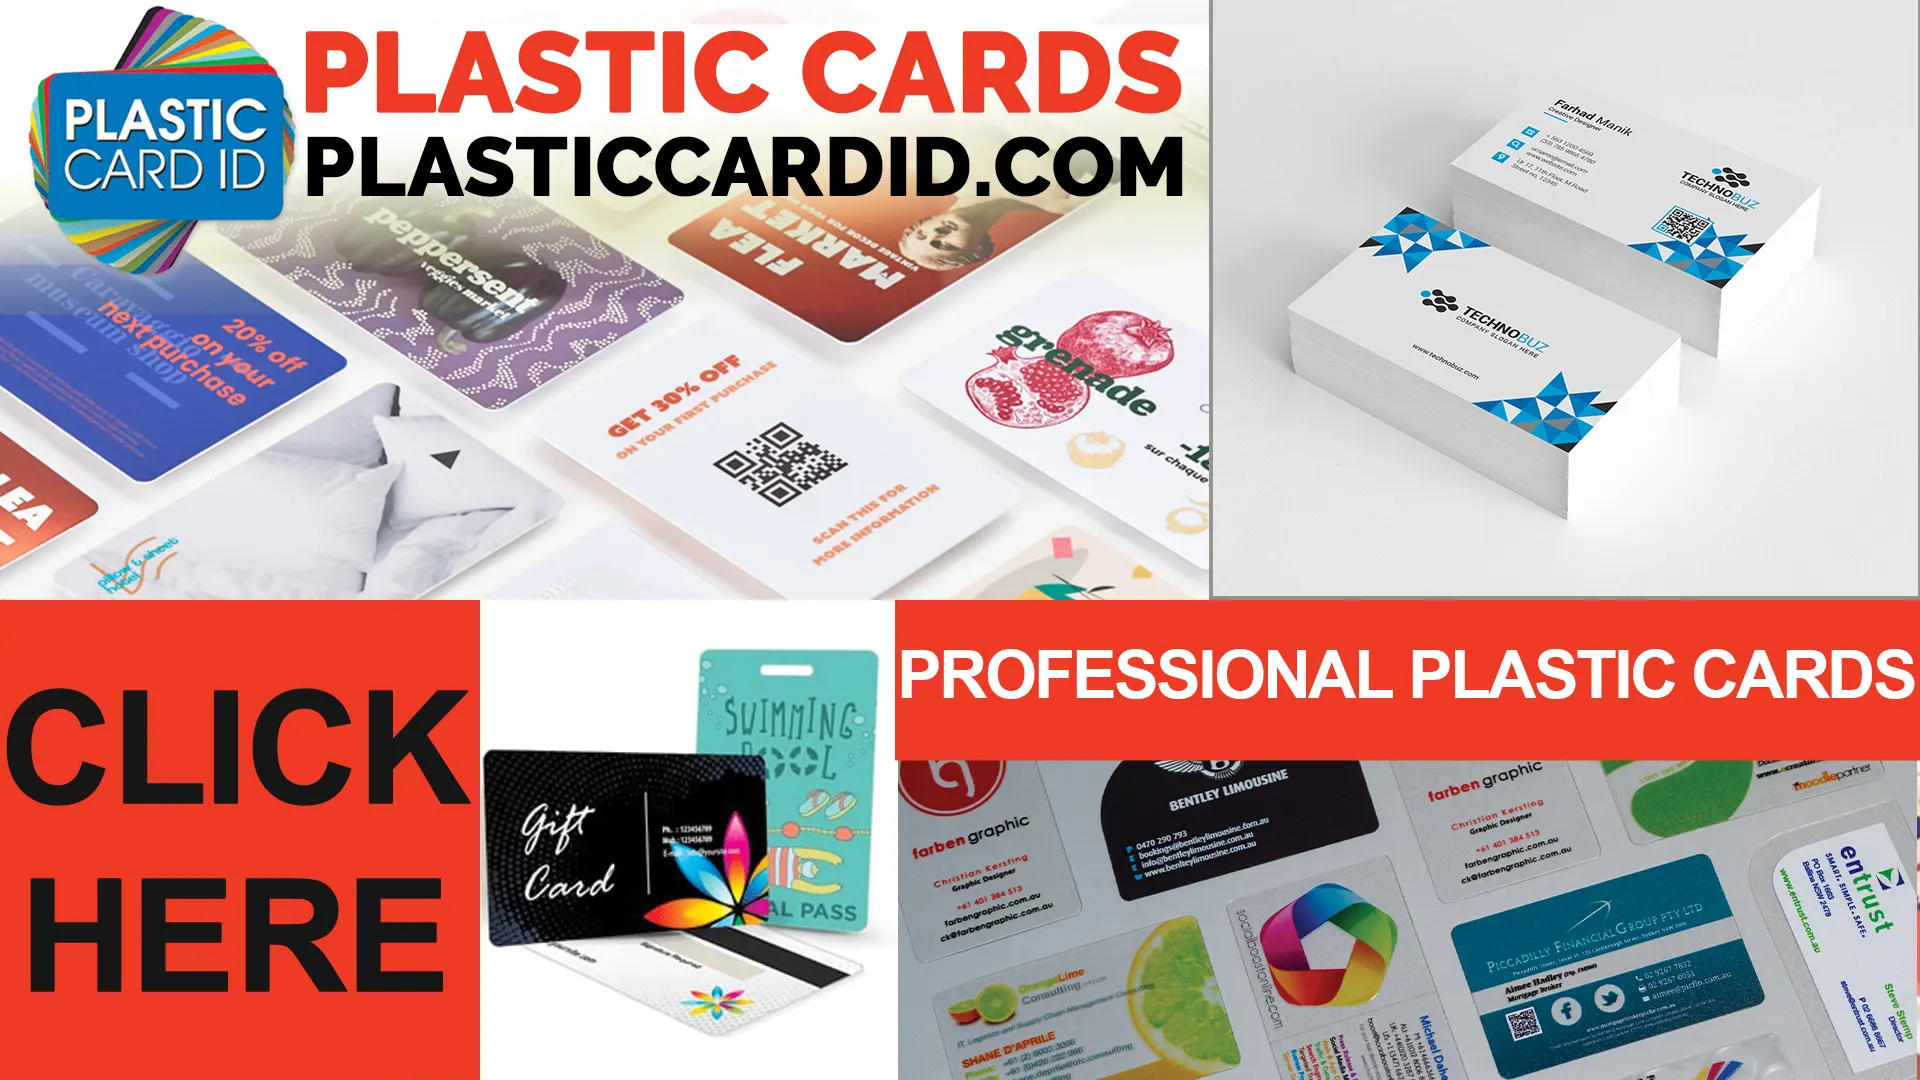 Transparent and Frosted Plastic Cards: The Clear Choice for Your Business